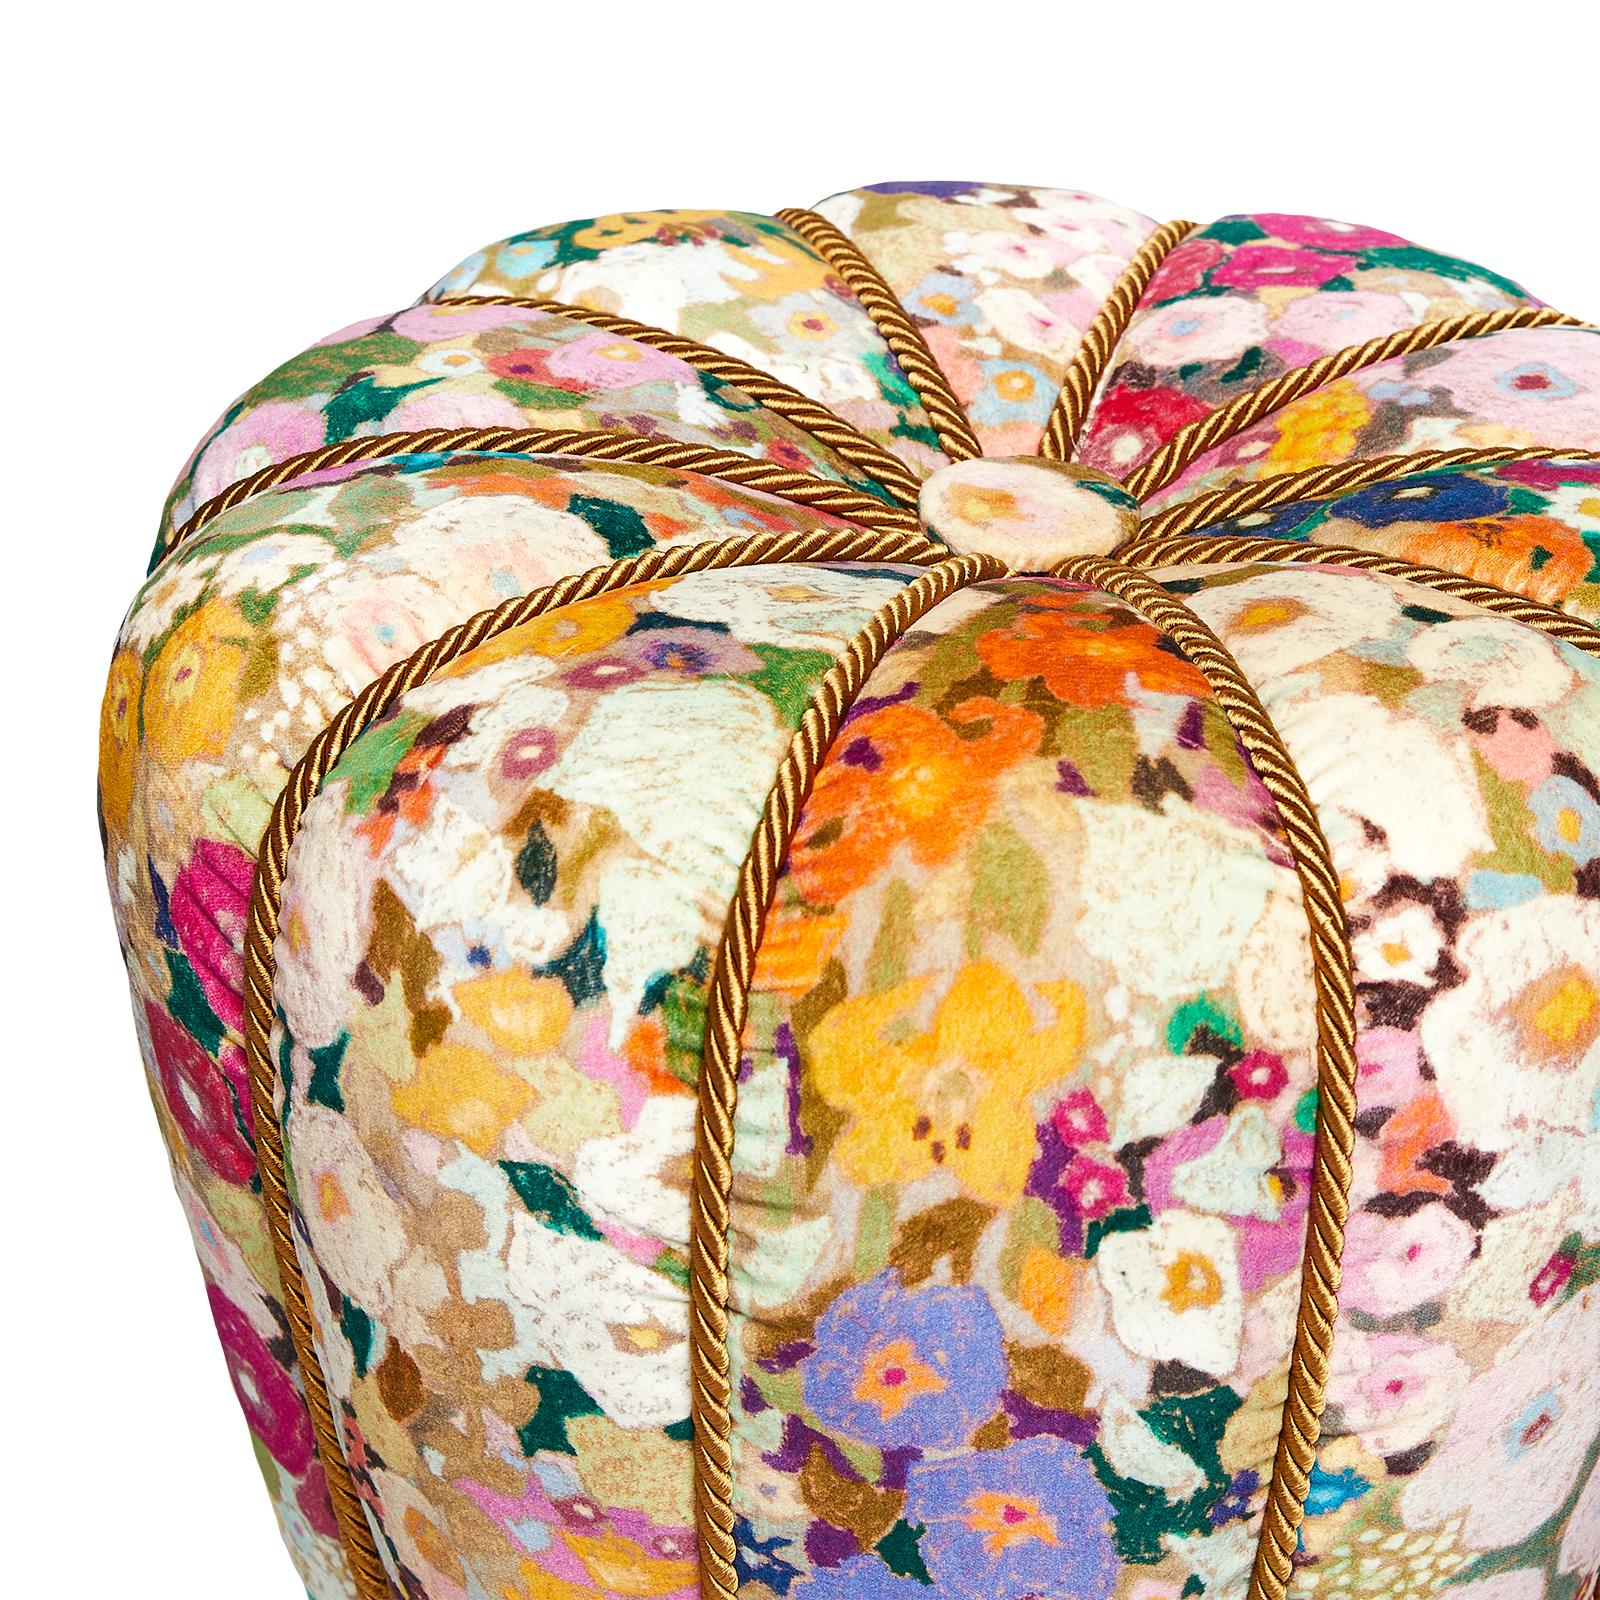 This 1950s tabouret stool by Jindrich Halabala has been brought into the 21st century with House of Hackney’s beloved HOLLYHOCKS floral print velvet.

Our Gustav Klimt inspired floral combines pastoral purity with House of Hackney’s punk spirit; the